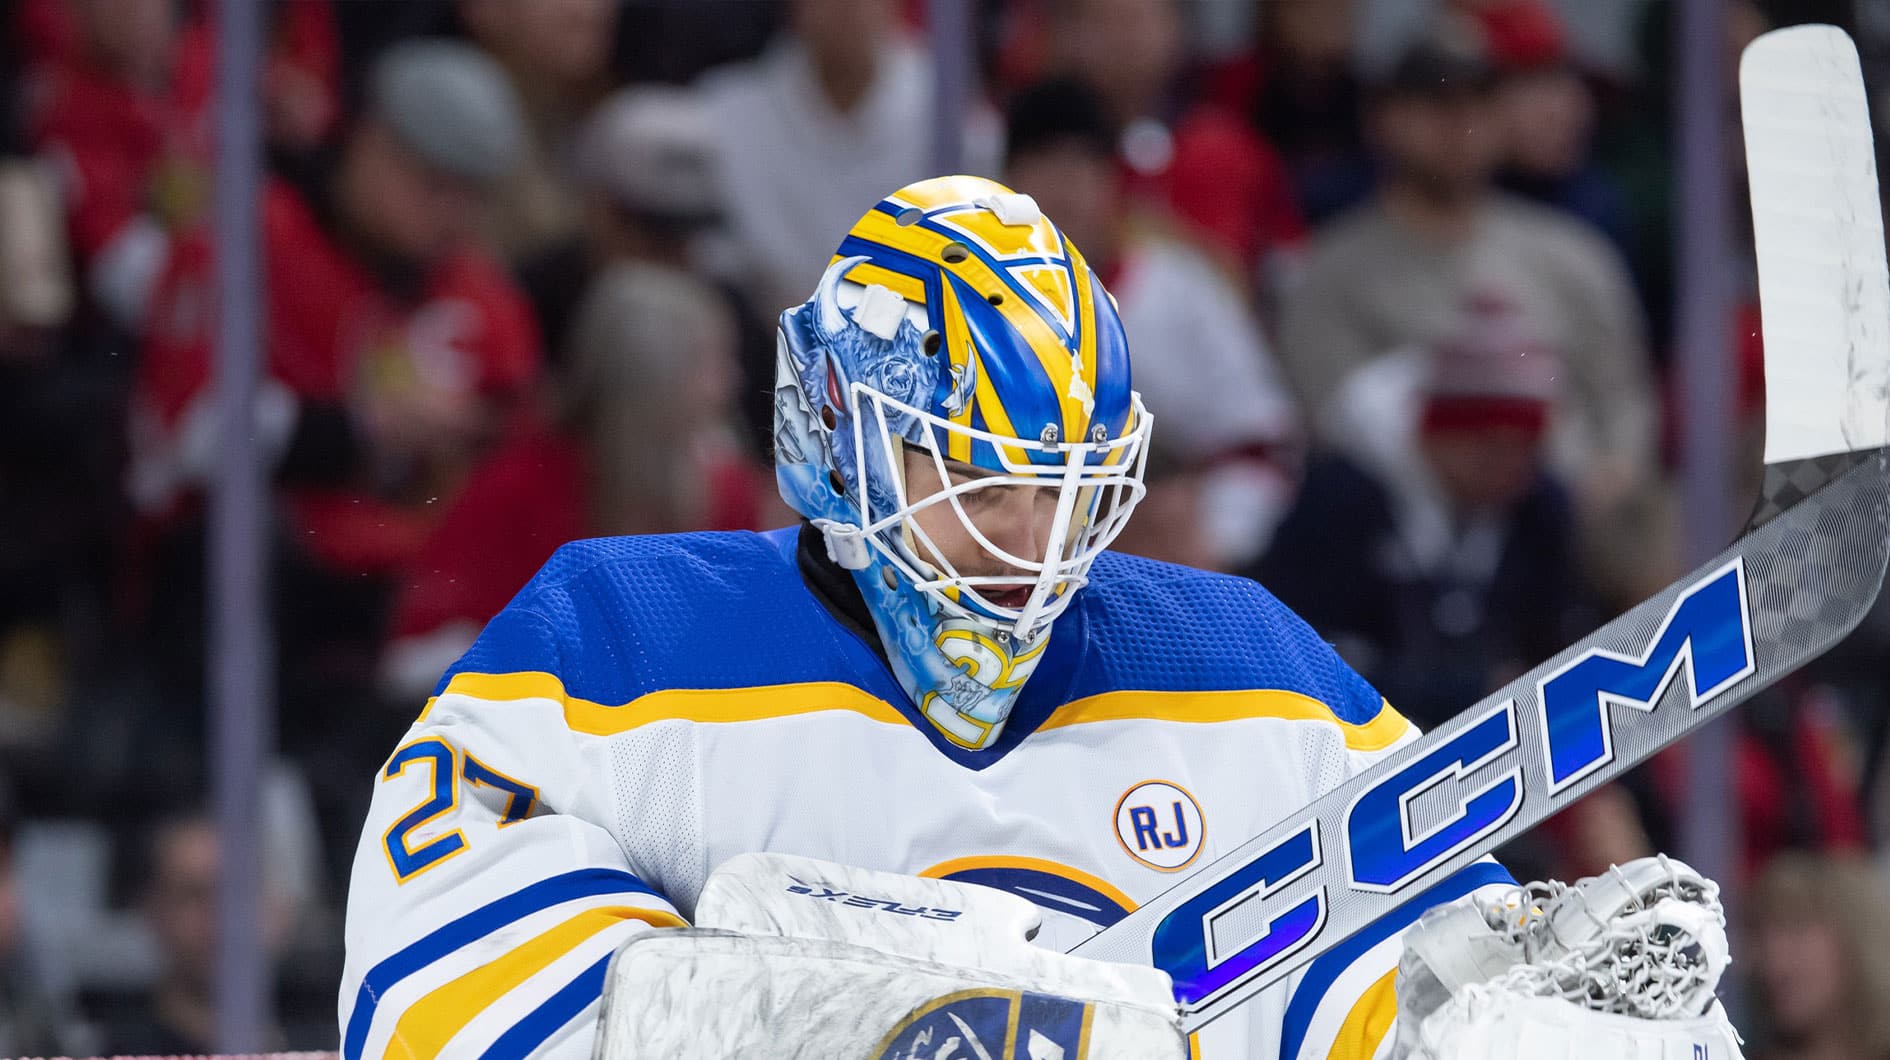 Buffalo Sabres goalie Devon Levi (27) suits up prior to the start of game against the Ottawa Senators at the Canadian Tire Centre.